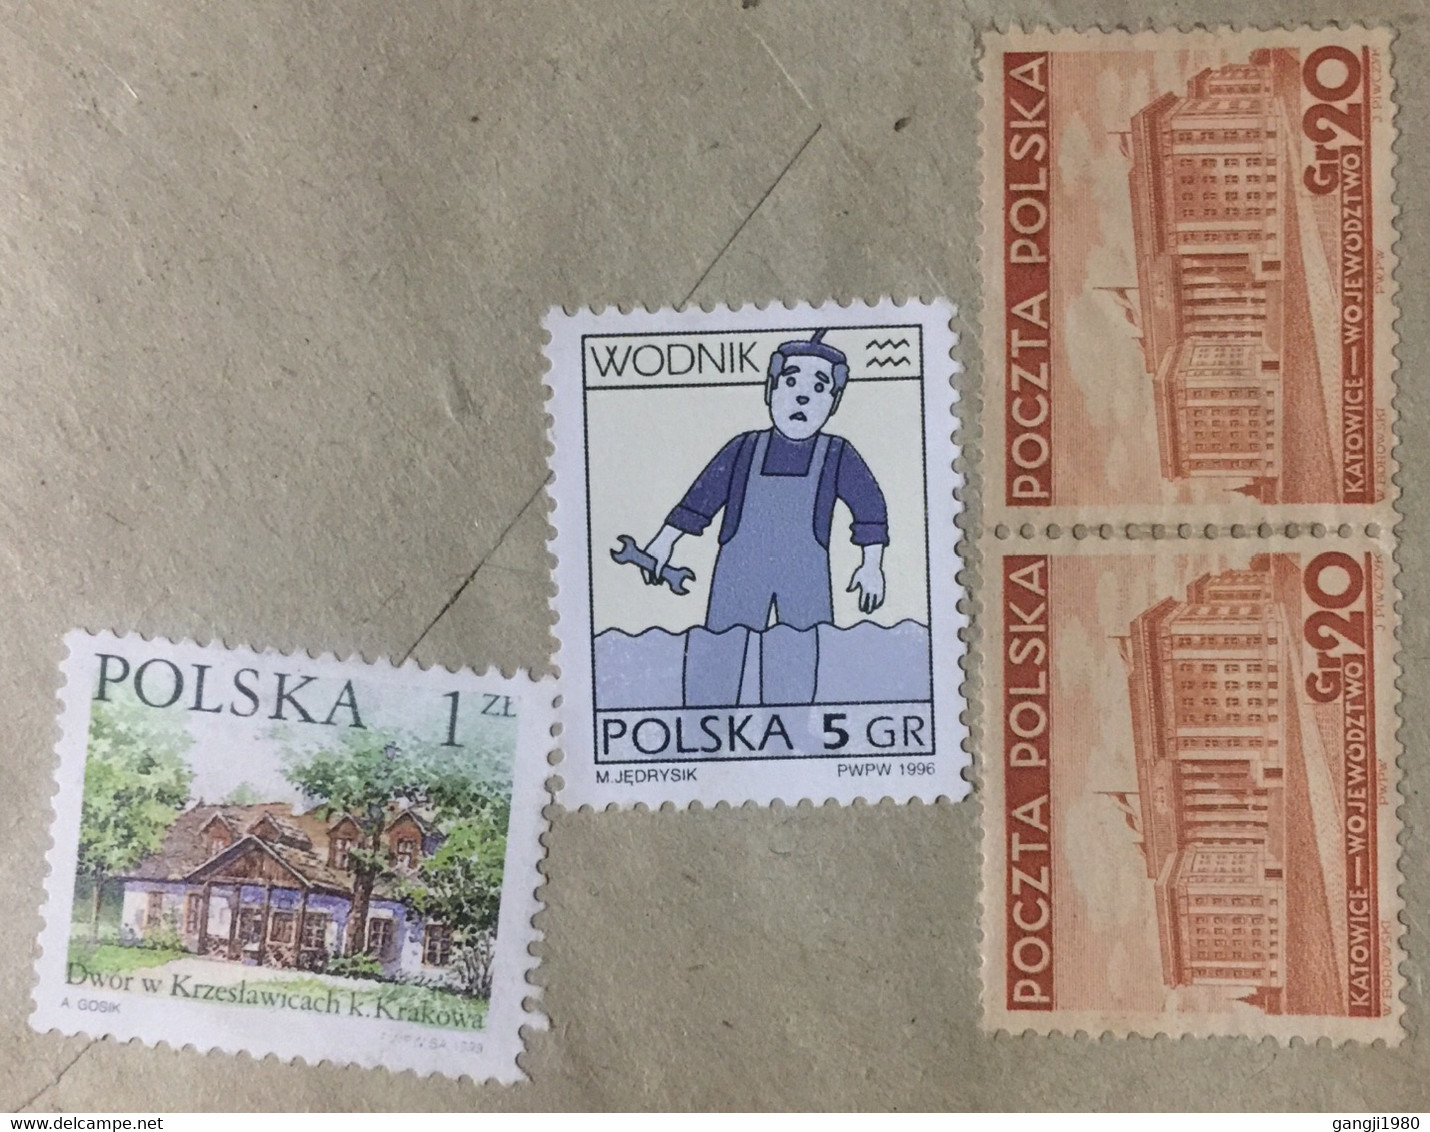 POLAND 2000, USED AIRMAIL COVER TO INDIA 4 DIFFERENT 1958 PICTURAL SPECIAL CANCELLATION, KATOWIDE ,HOUSE MUSIC,BUILDIN, - Covers & Documents